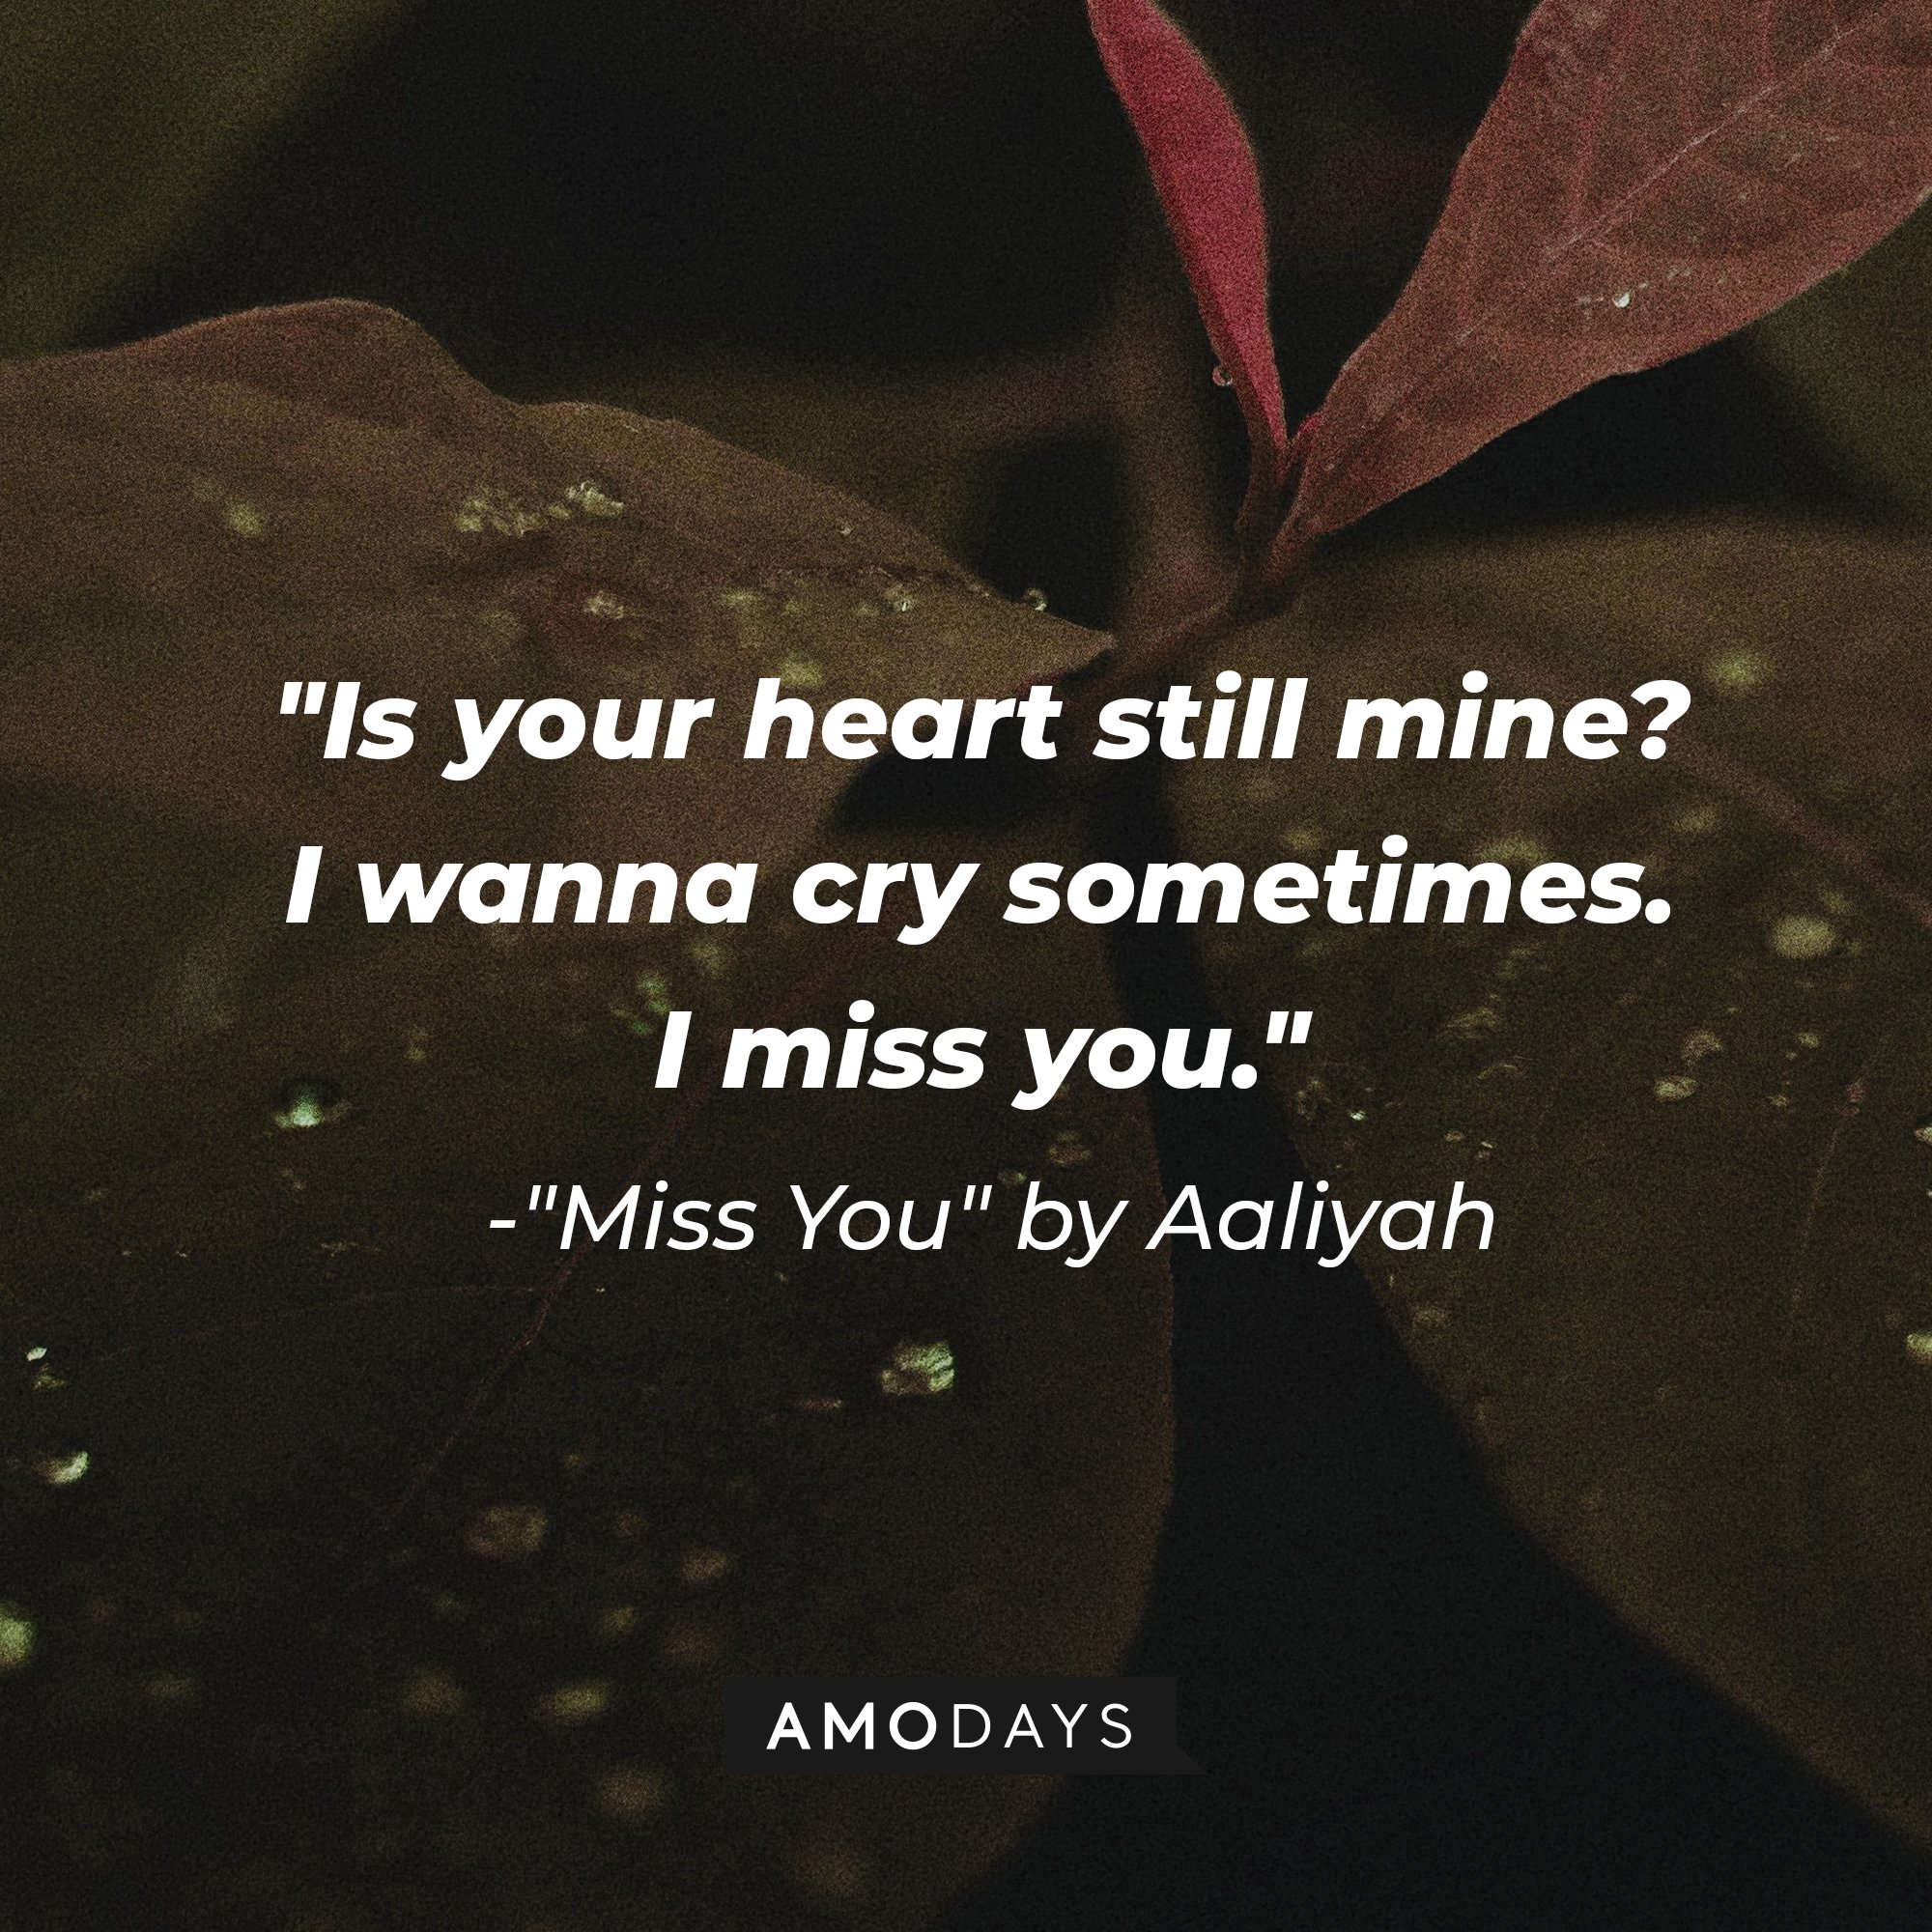 Aaliyah’s quote from "Miss You": "Is your heart still mine? I wanna cry sometimes. I miss you." | Image: AmoDays